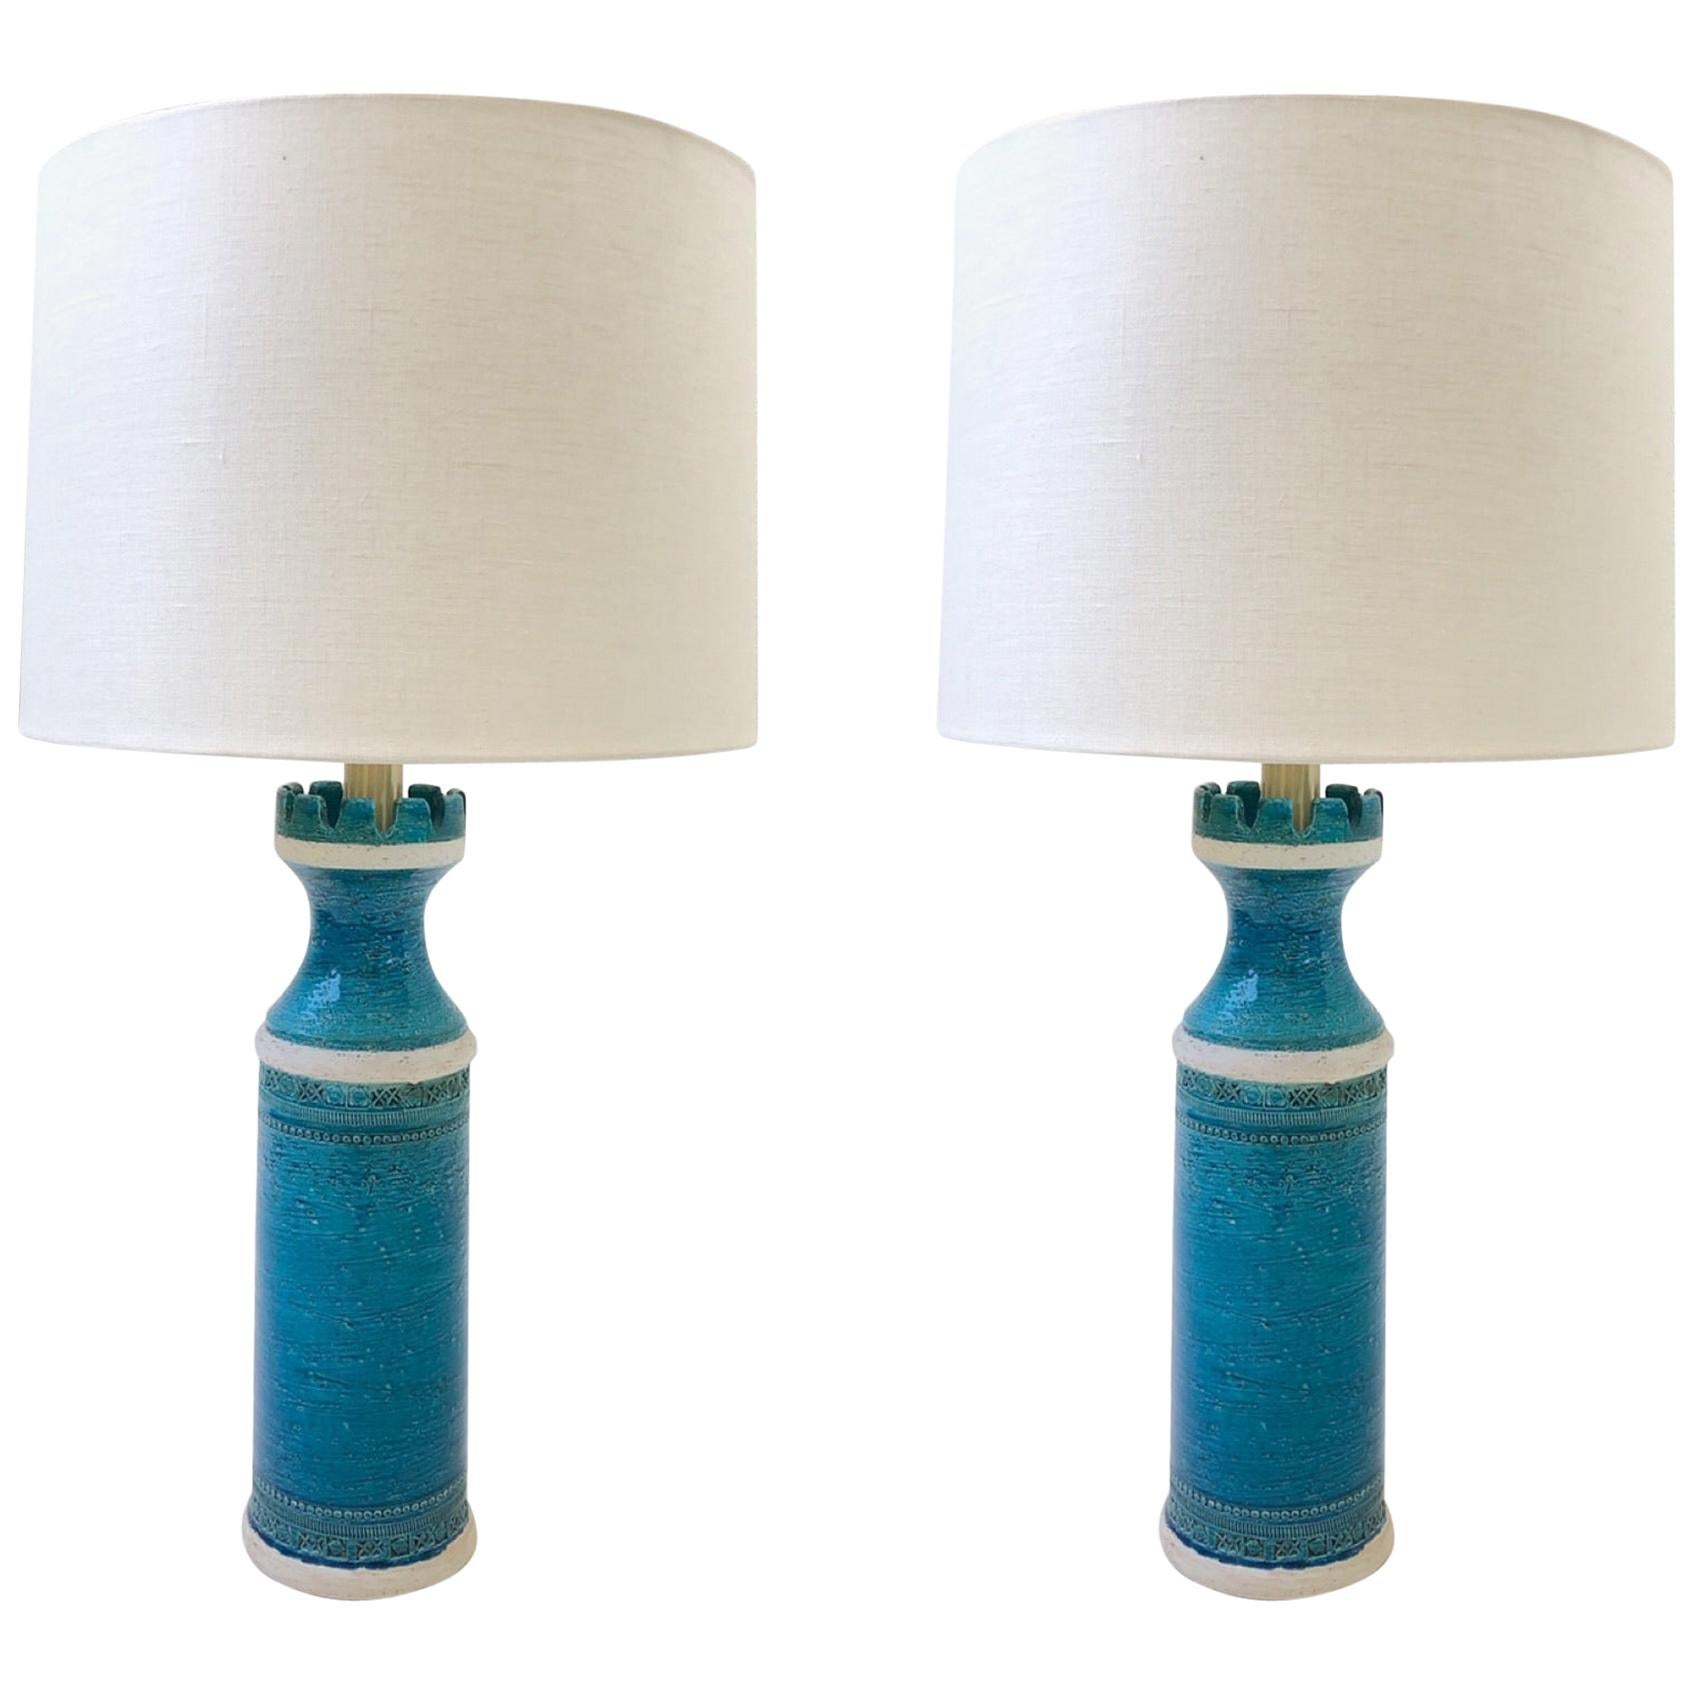 Italian Ceramic and Brass Table Lamps by Aldo Londi for Bitossi